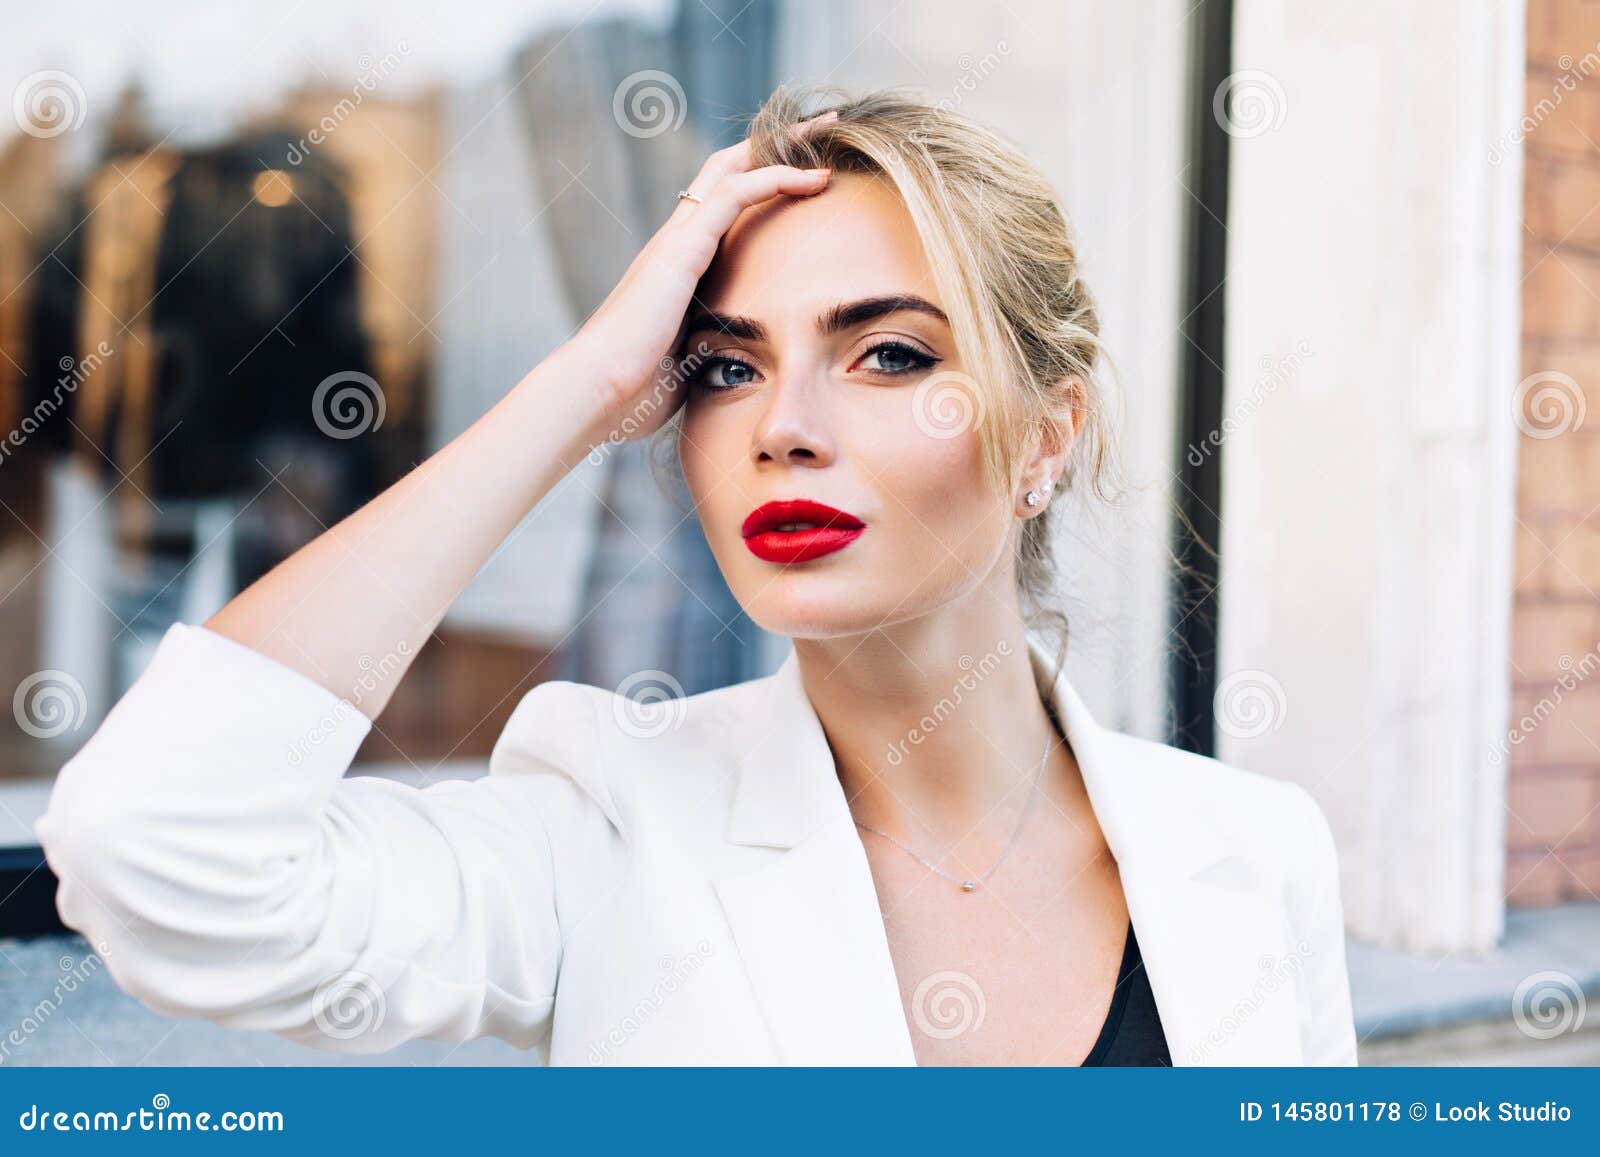 closeup portrait attractive woman with red lips on street . she wears white jacket, touching hair, looking to camera.